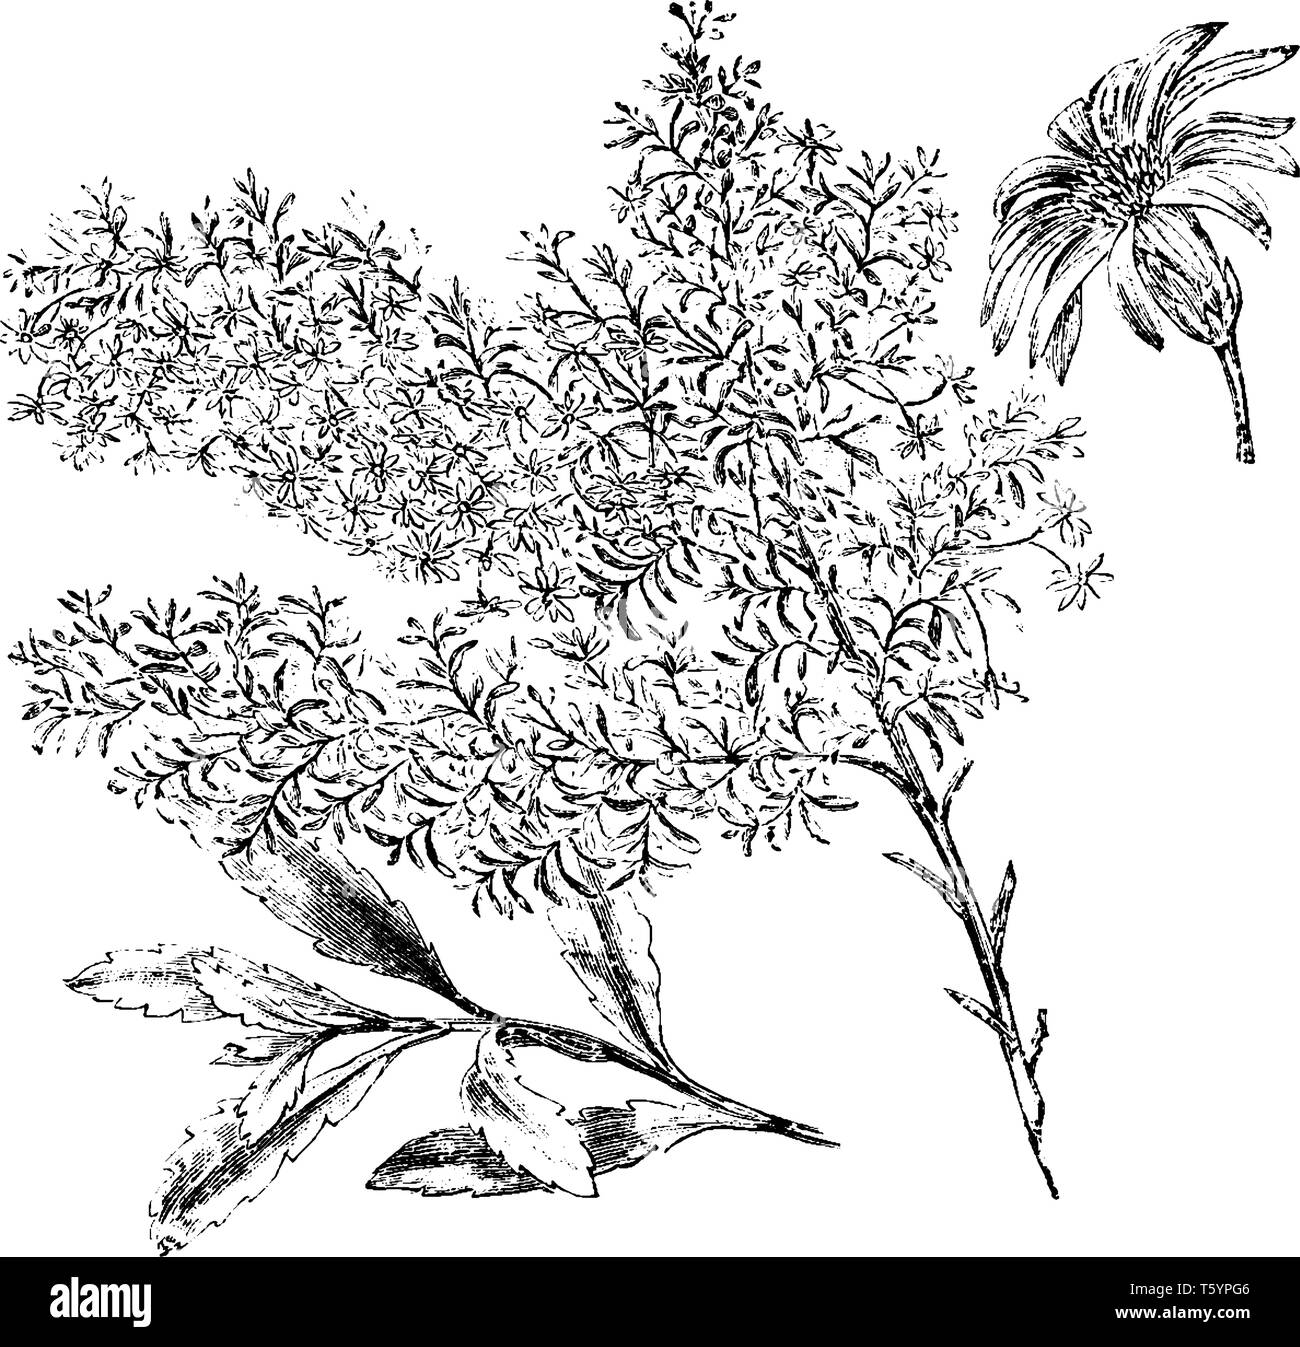 Olearia gunnia flowers are white and bloom in September. The branches are hoary. Pictured is a flowering branch, branchlet, and flower head of olearia Stock Vector